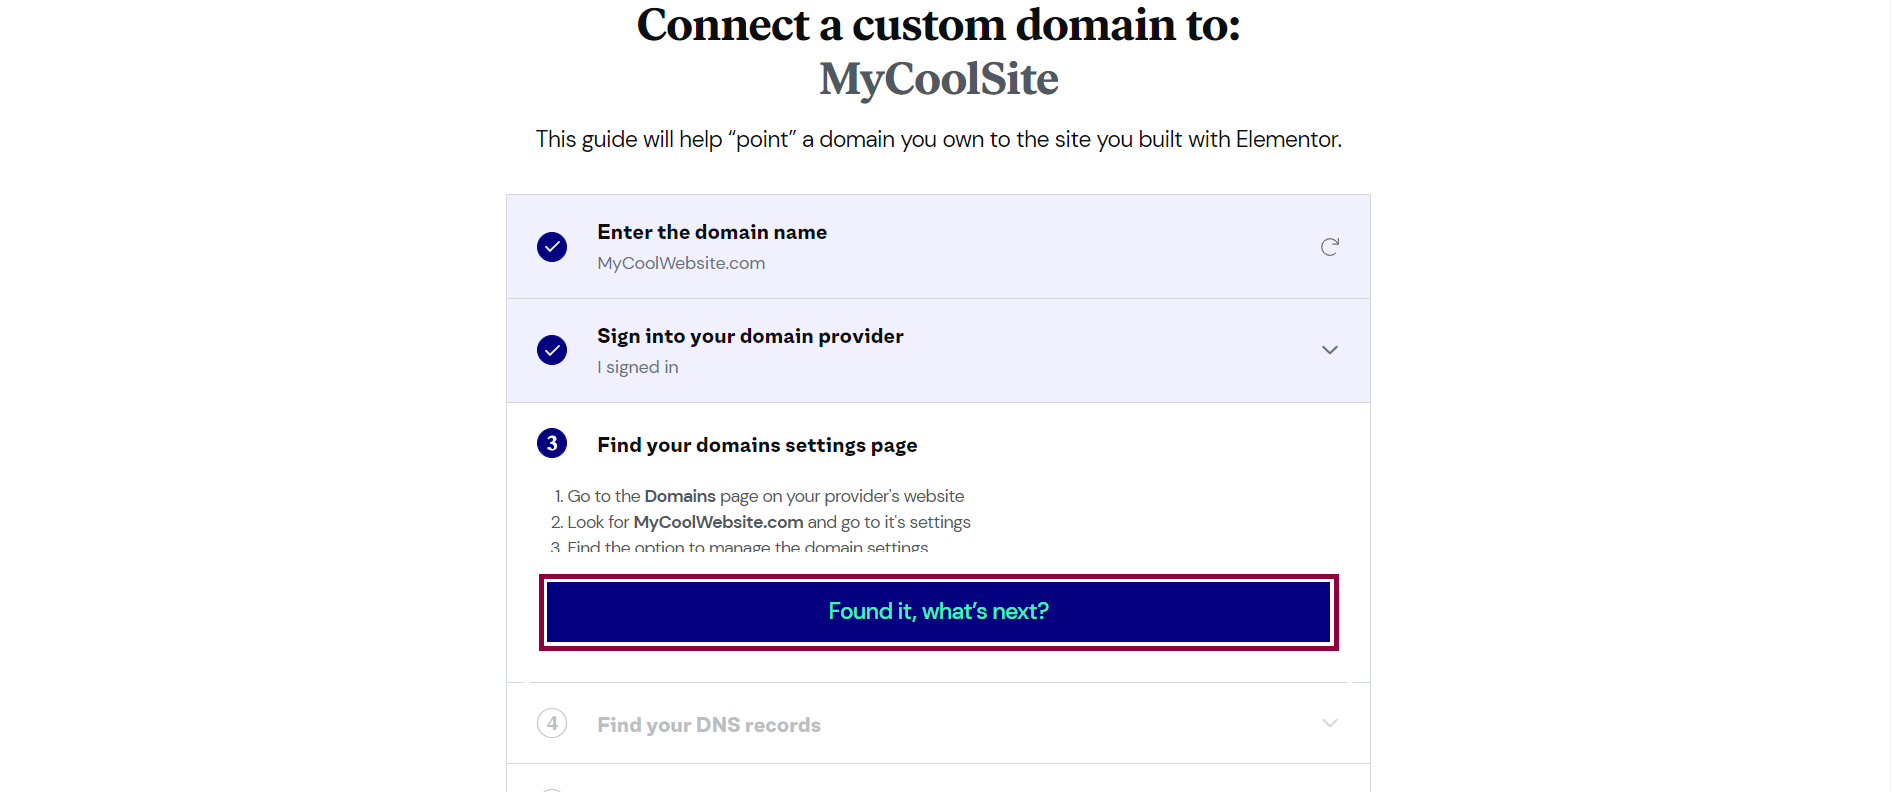 Connect domain window after finding the domains settings page of your provider